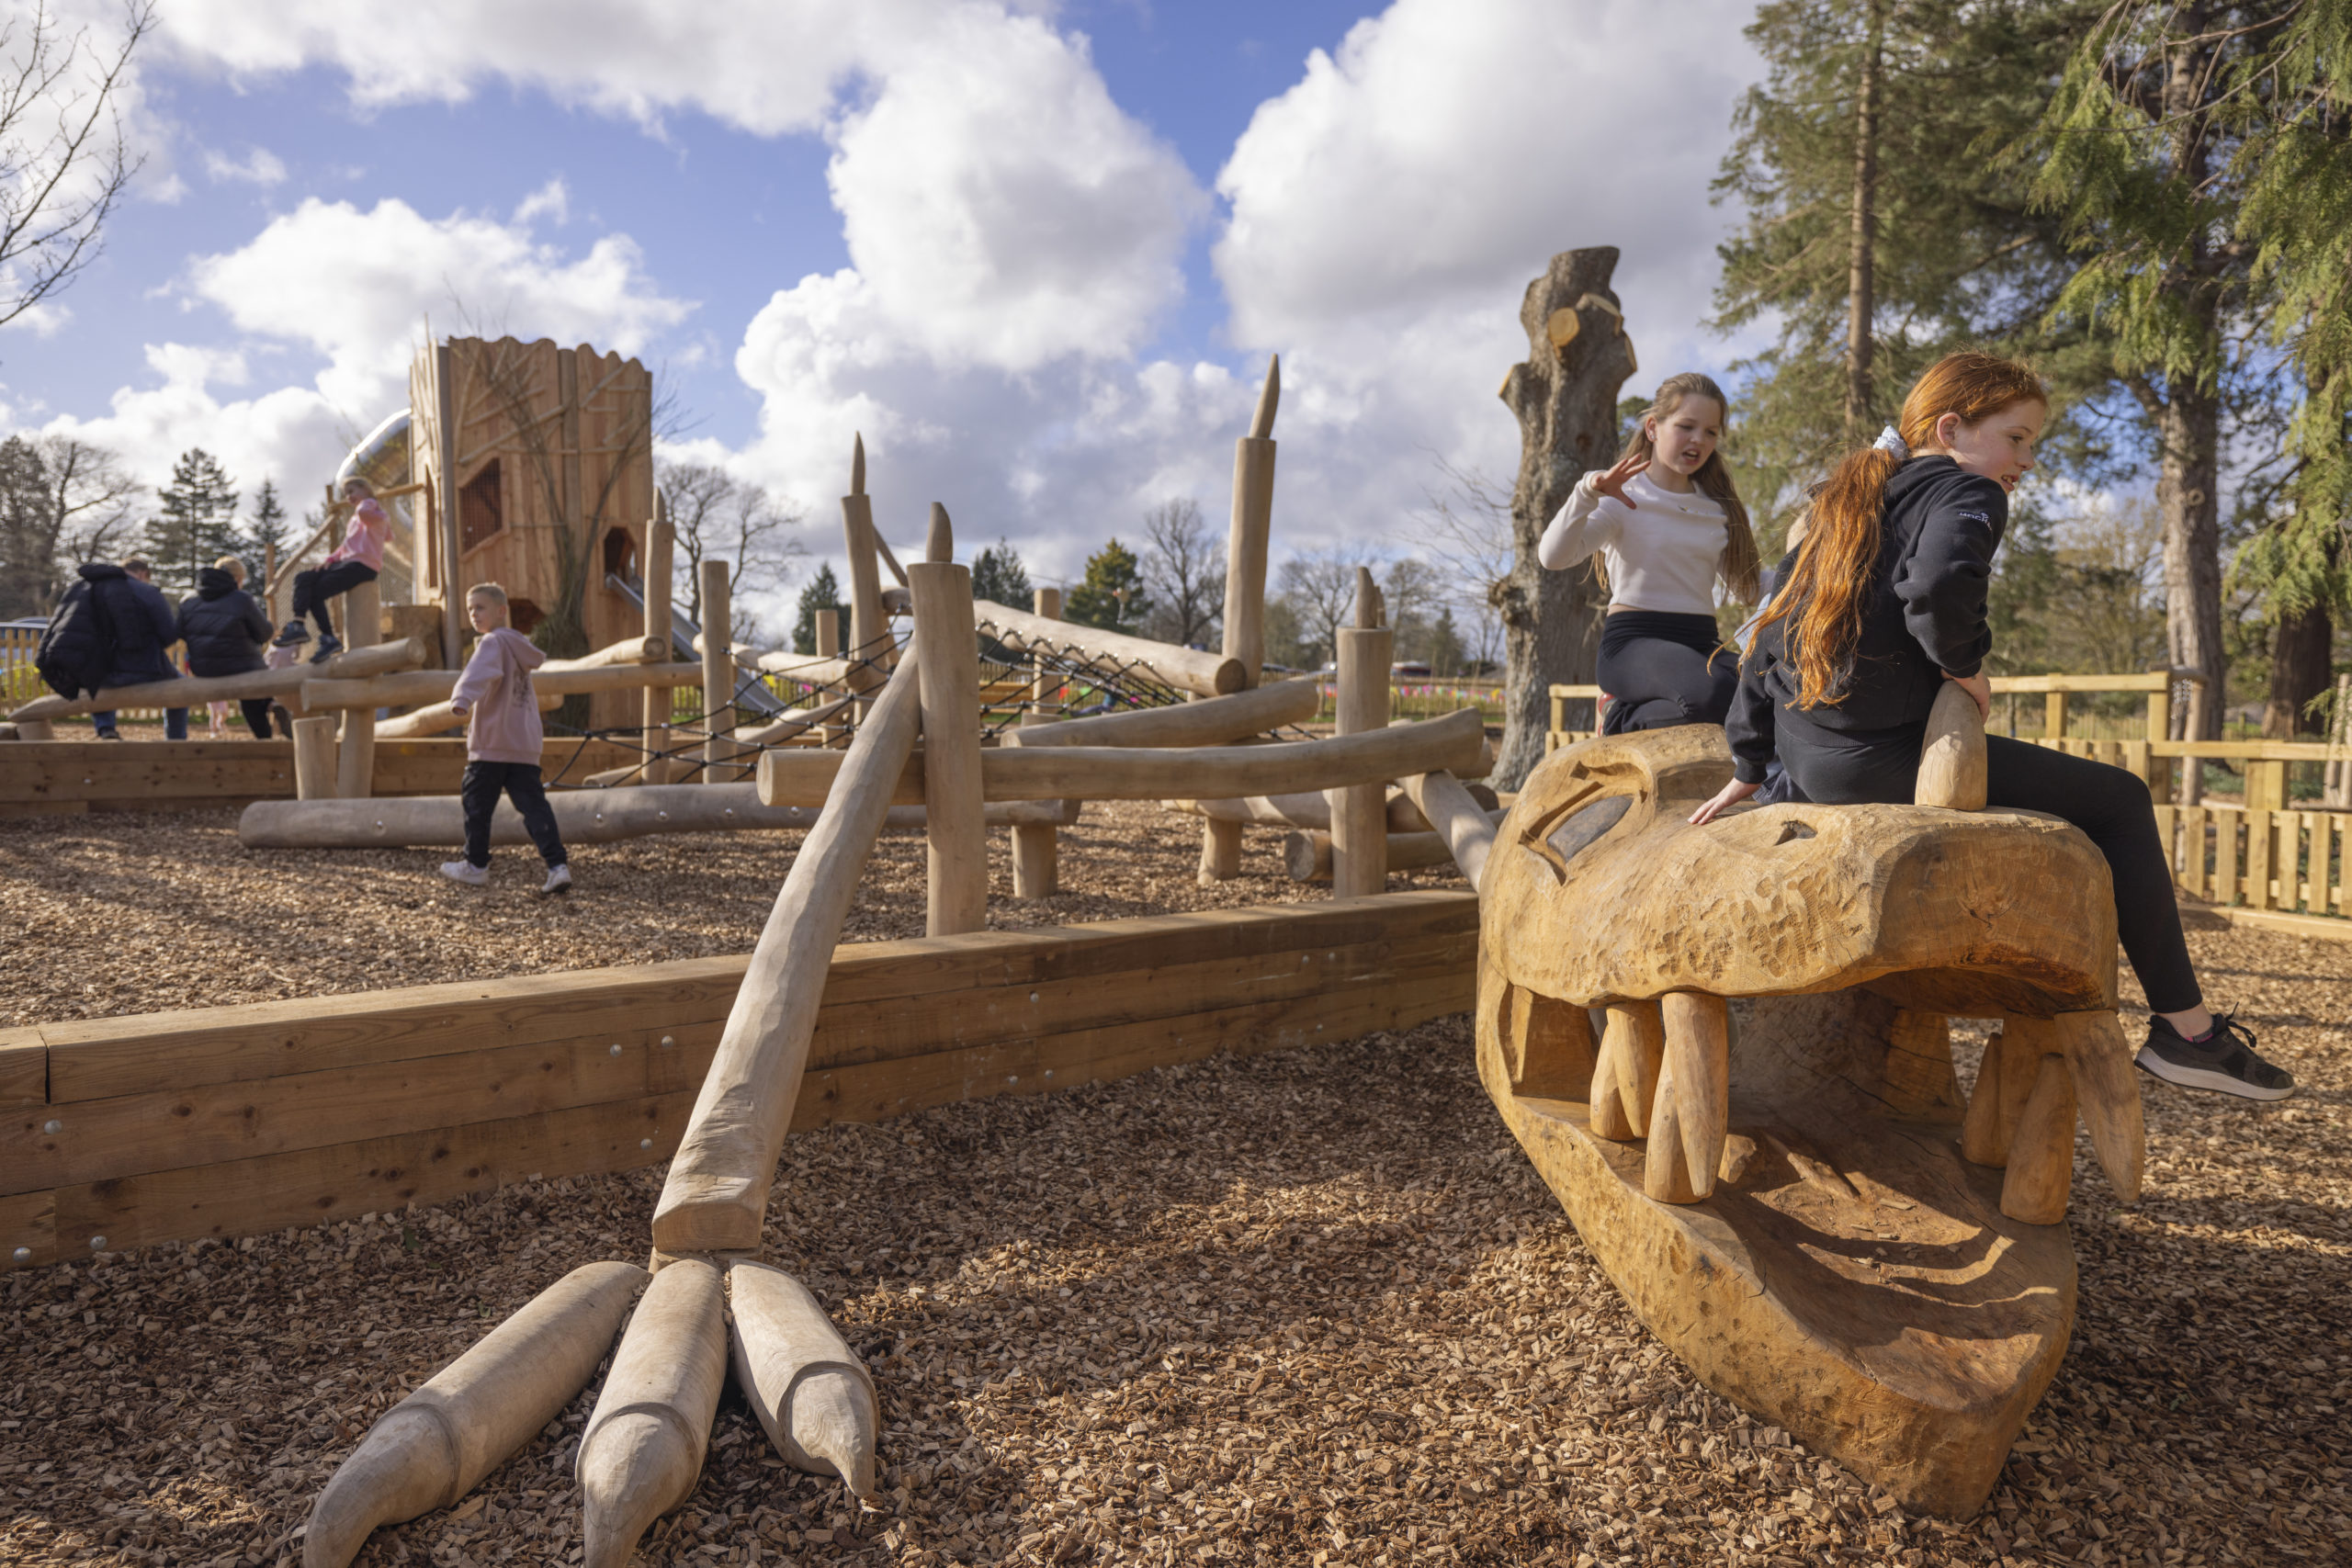 Children are playing in an outdoor playground featuring wooden structures. Two girls are climbing on a large wooden sculpture shaped like a dragon's head, with detailed carvings of teeth and eyes. Other children are exploring balance beams and climbing ropes in the background.